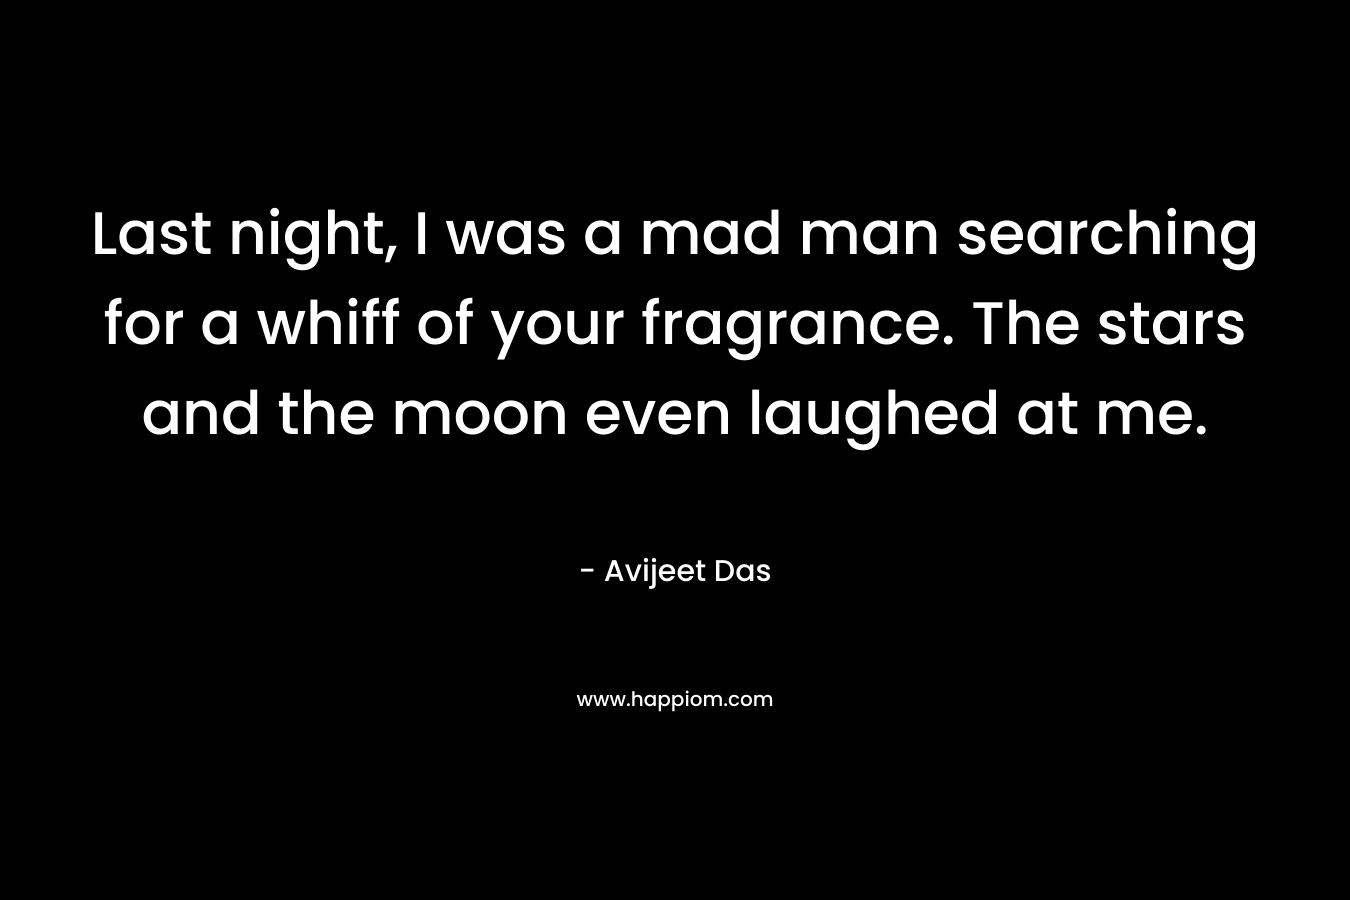 Last night, I was a mad man searching for a whiff of your fragrance. The stars and the moon even laughed at me. – Avijeet Das